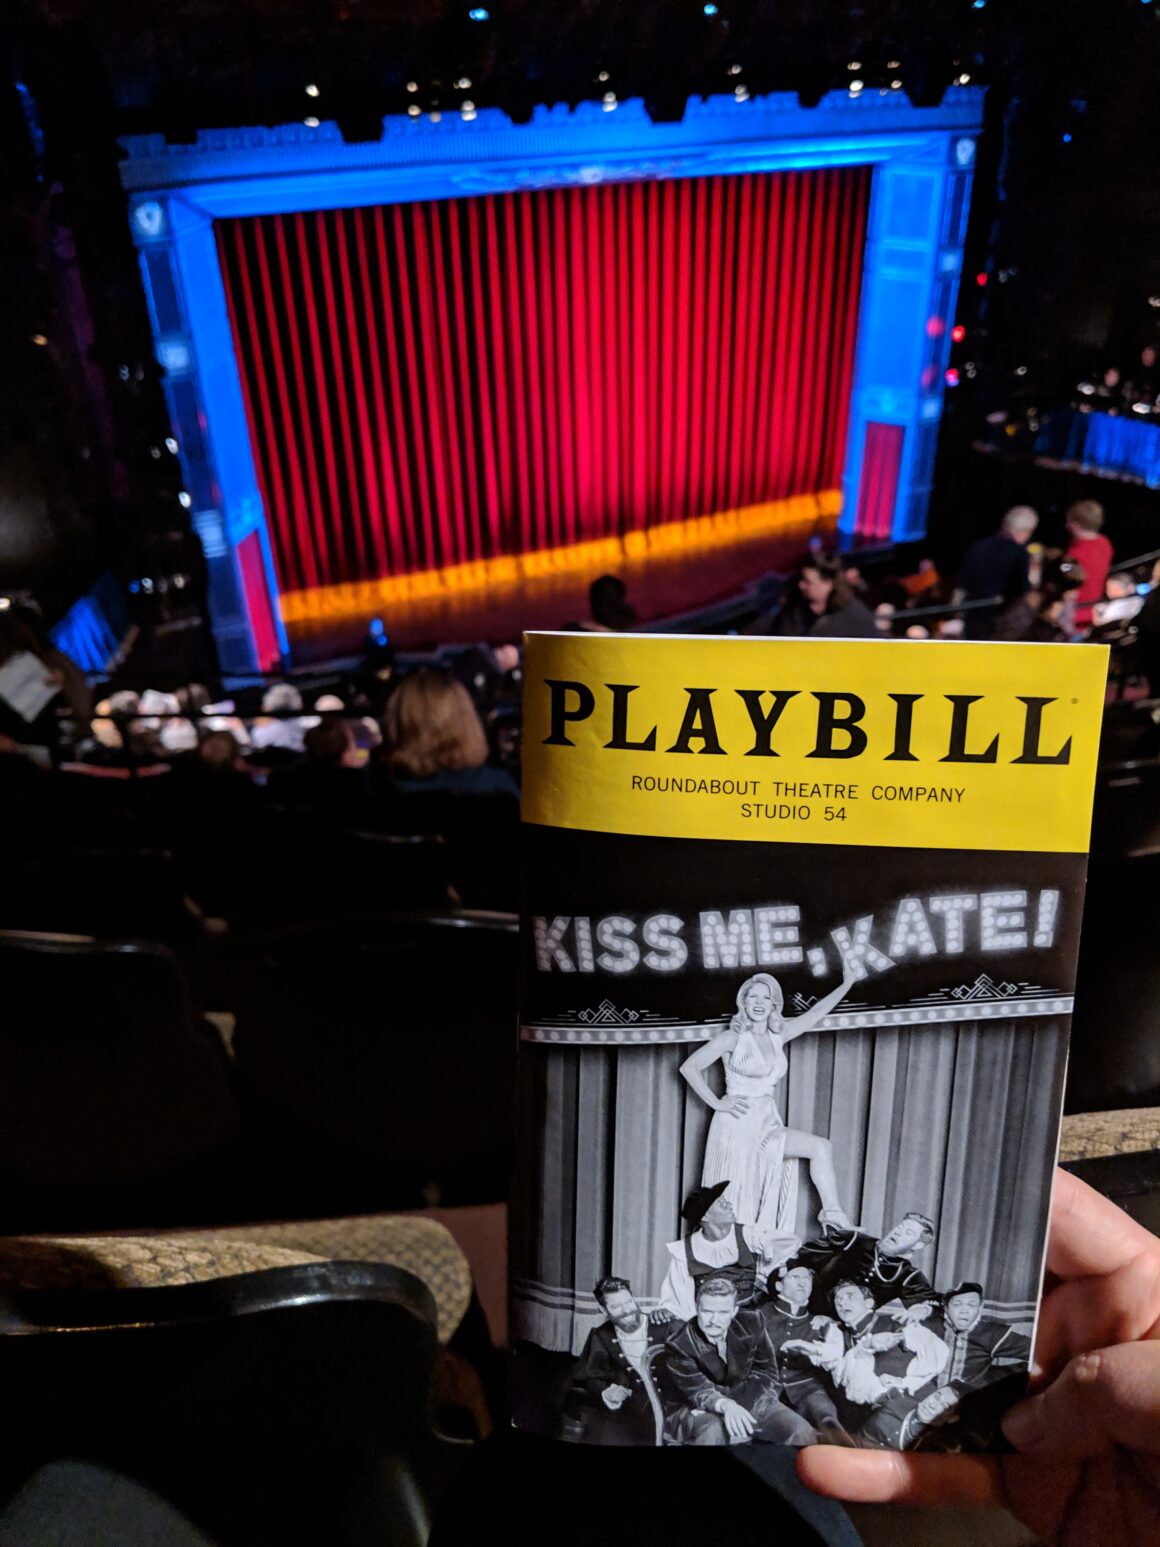 A photo of the Kiss Me Kate playbill in front of the Broadway stage during a solo Broadway show outing